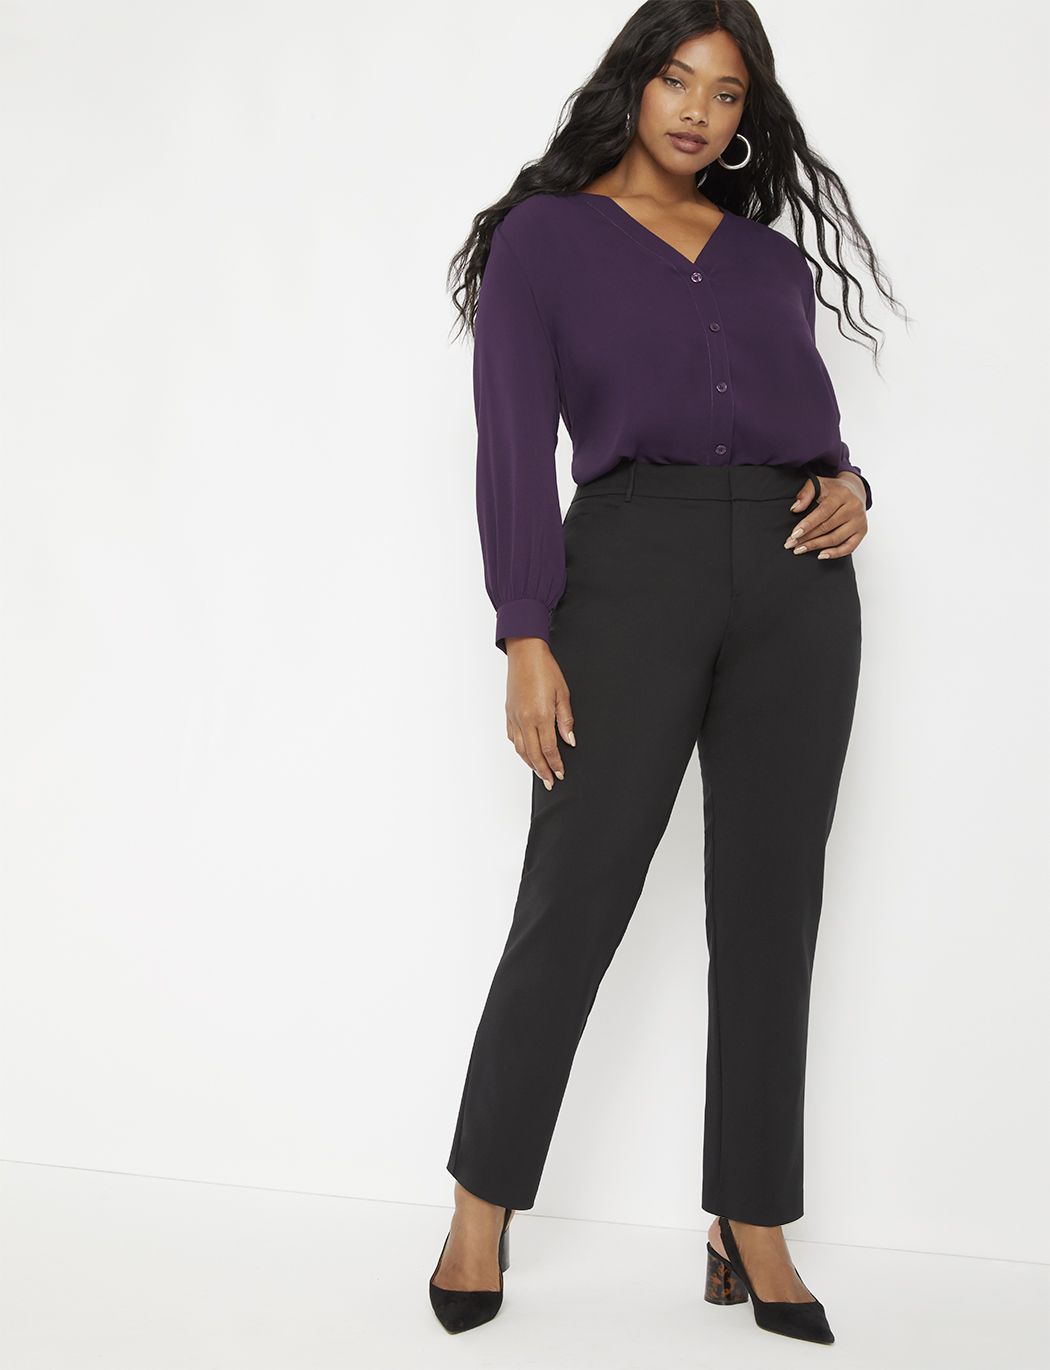 Kady Fit Double-Weave Pant | Eloquii